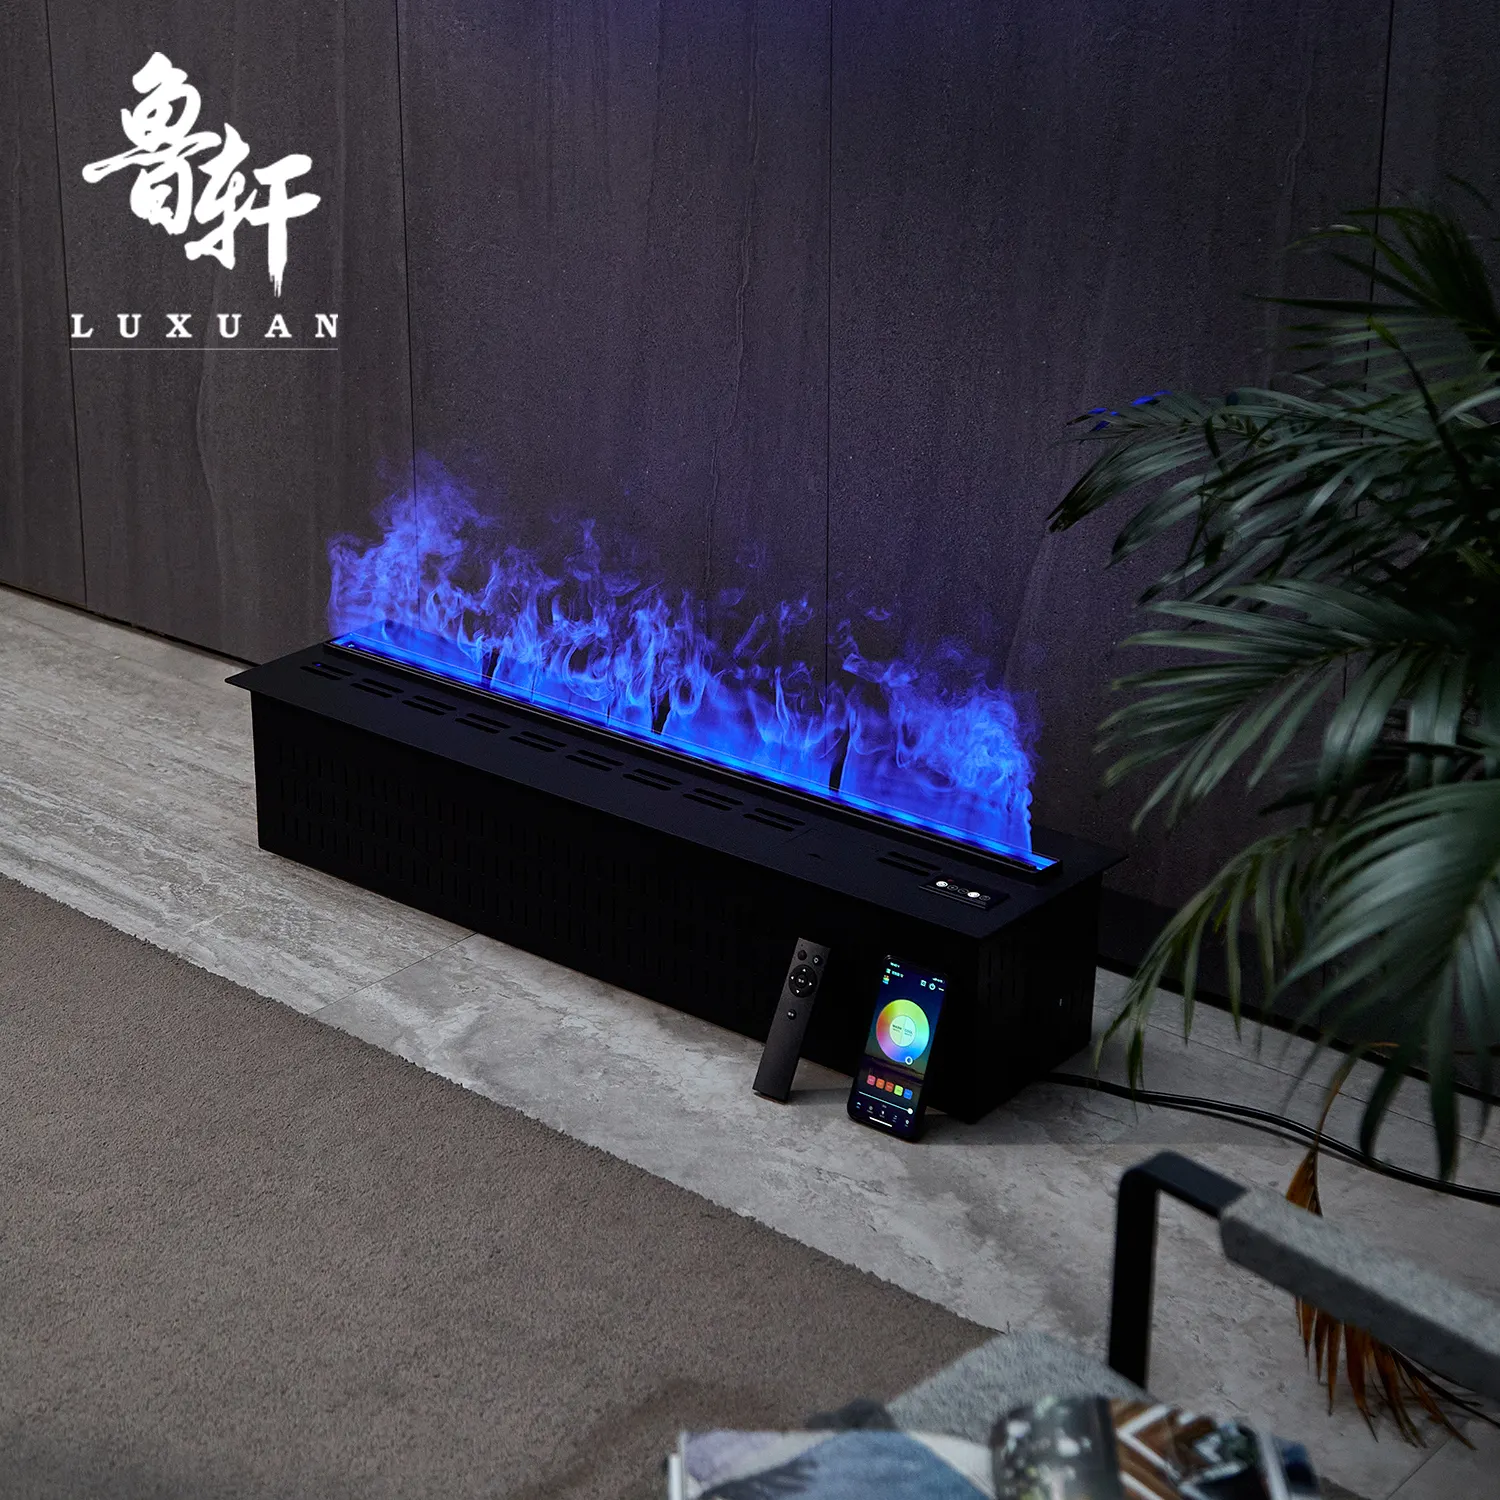 1800 Mm Auto 3d Led Flame Water camino elettric Mist artificial fire place Vapor Steam Wall recessed electric fireplace